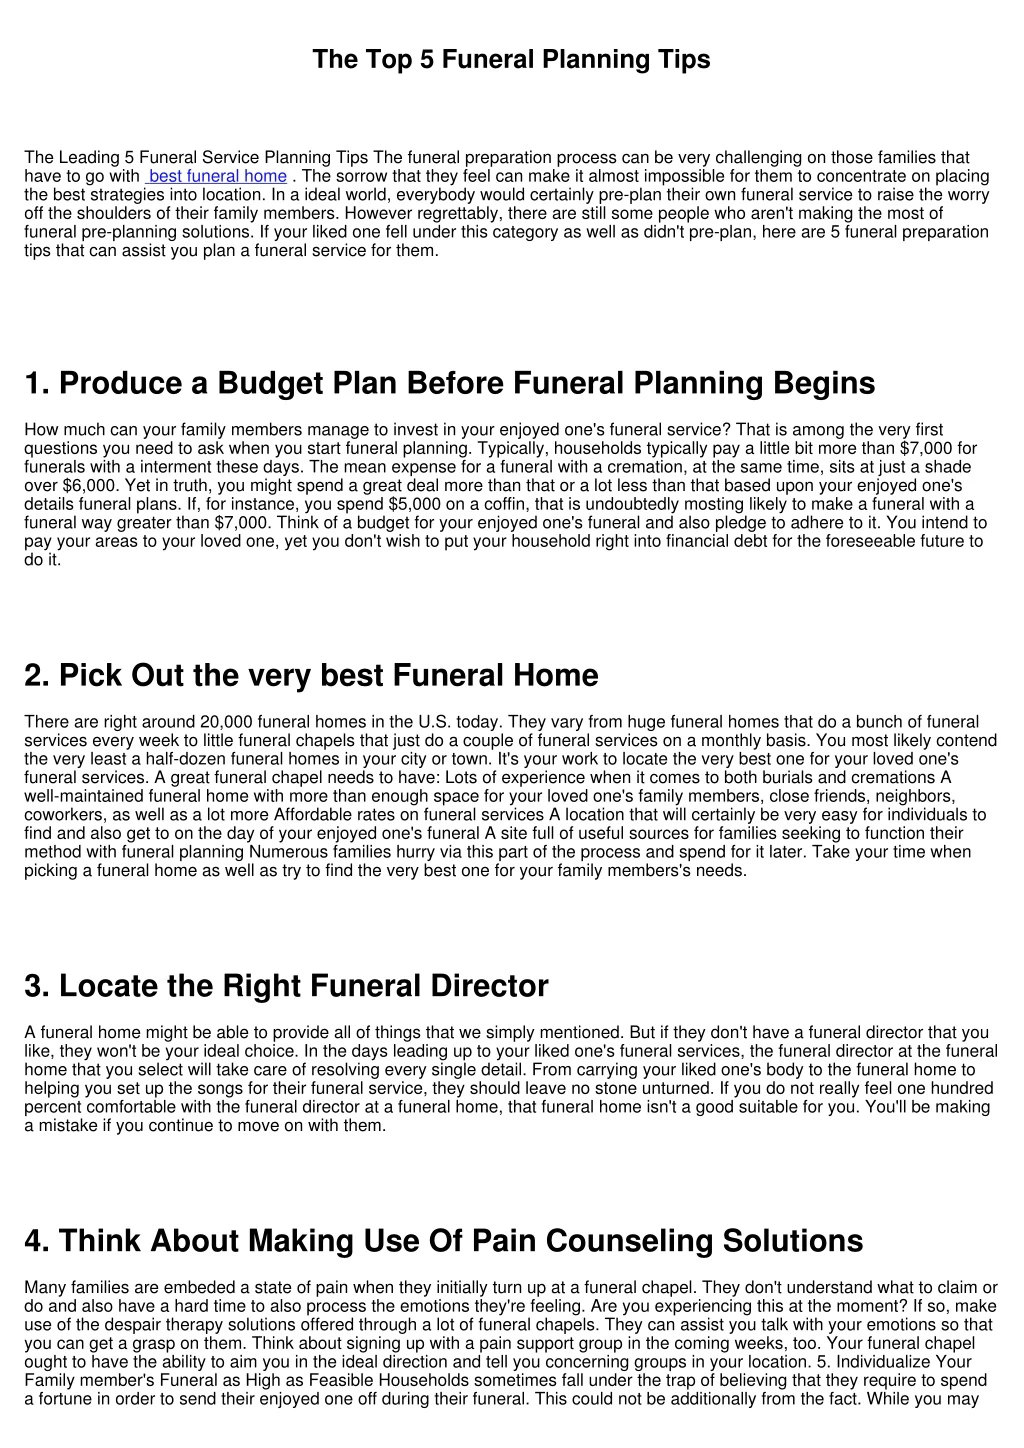 the top 5 funeral planning tips